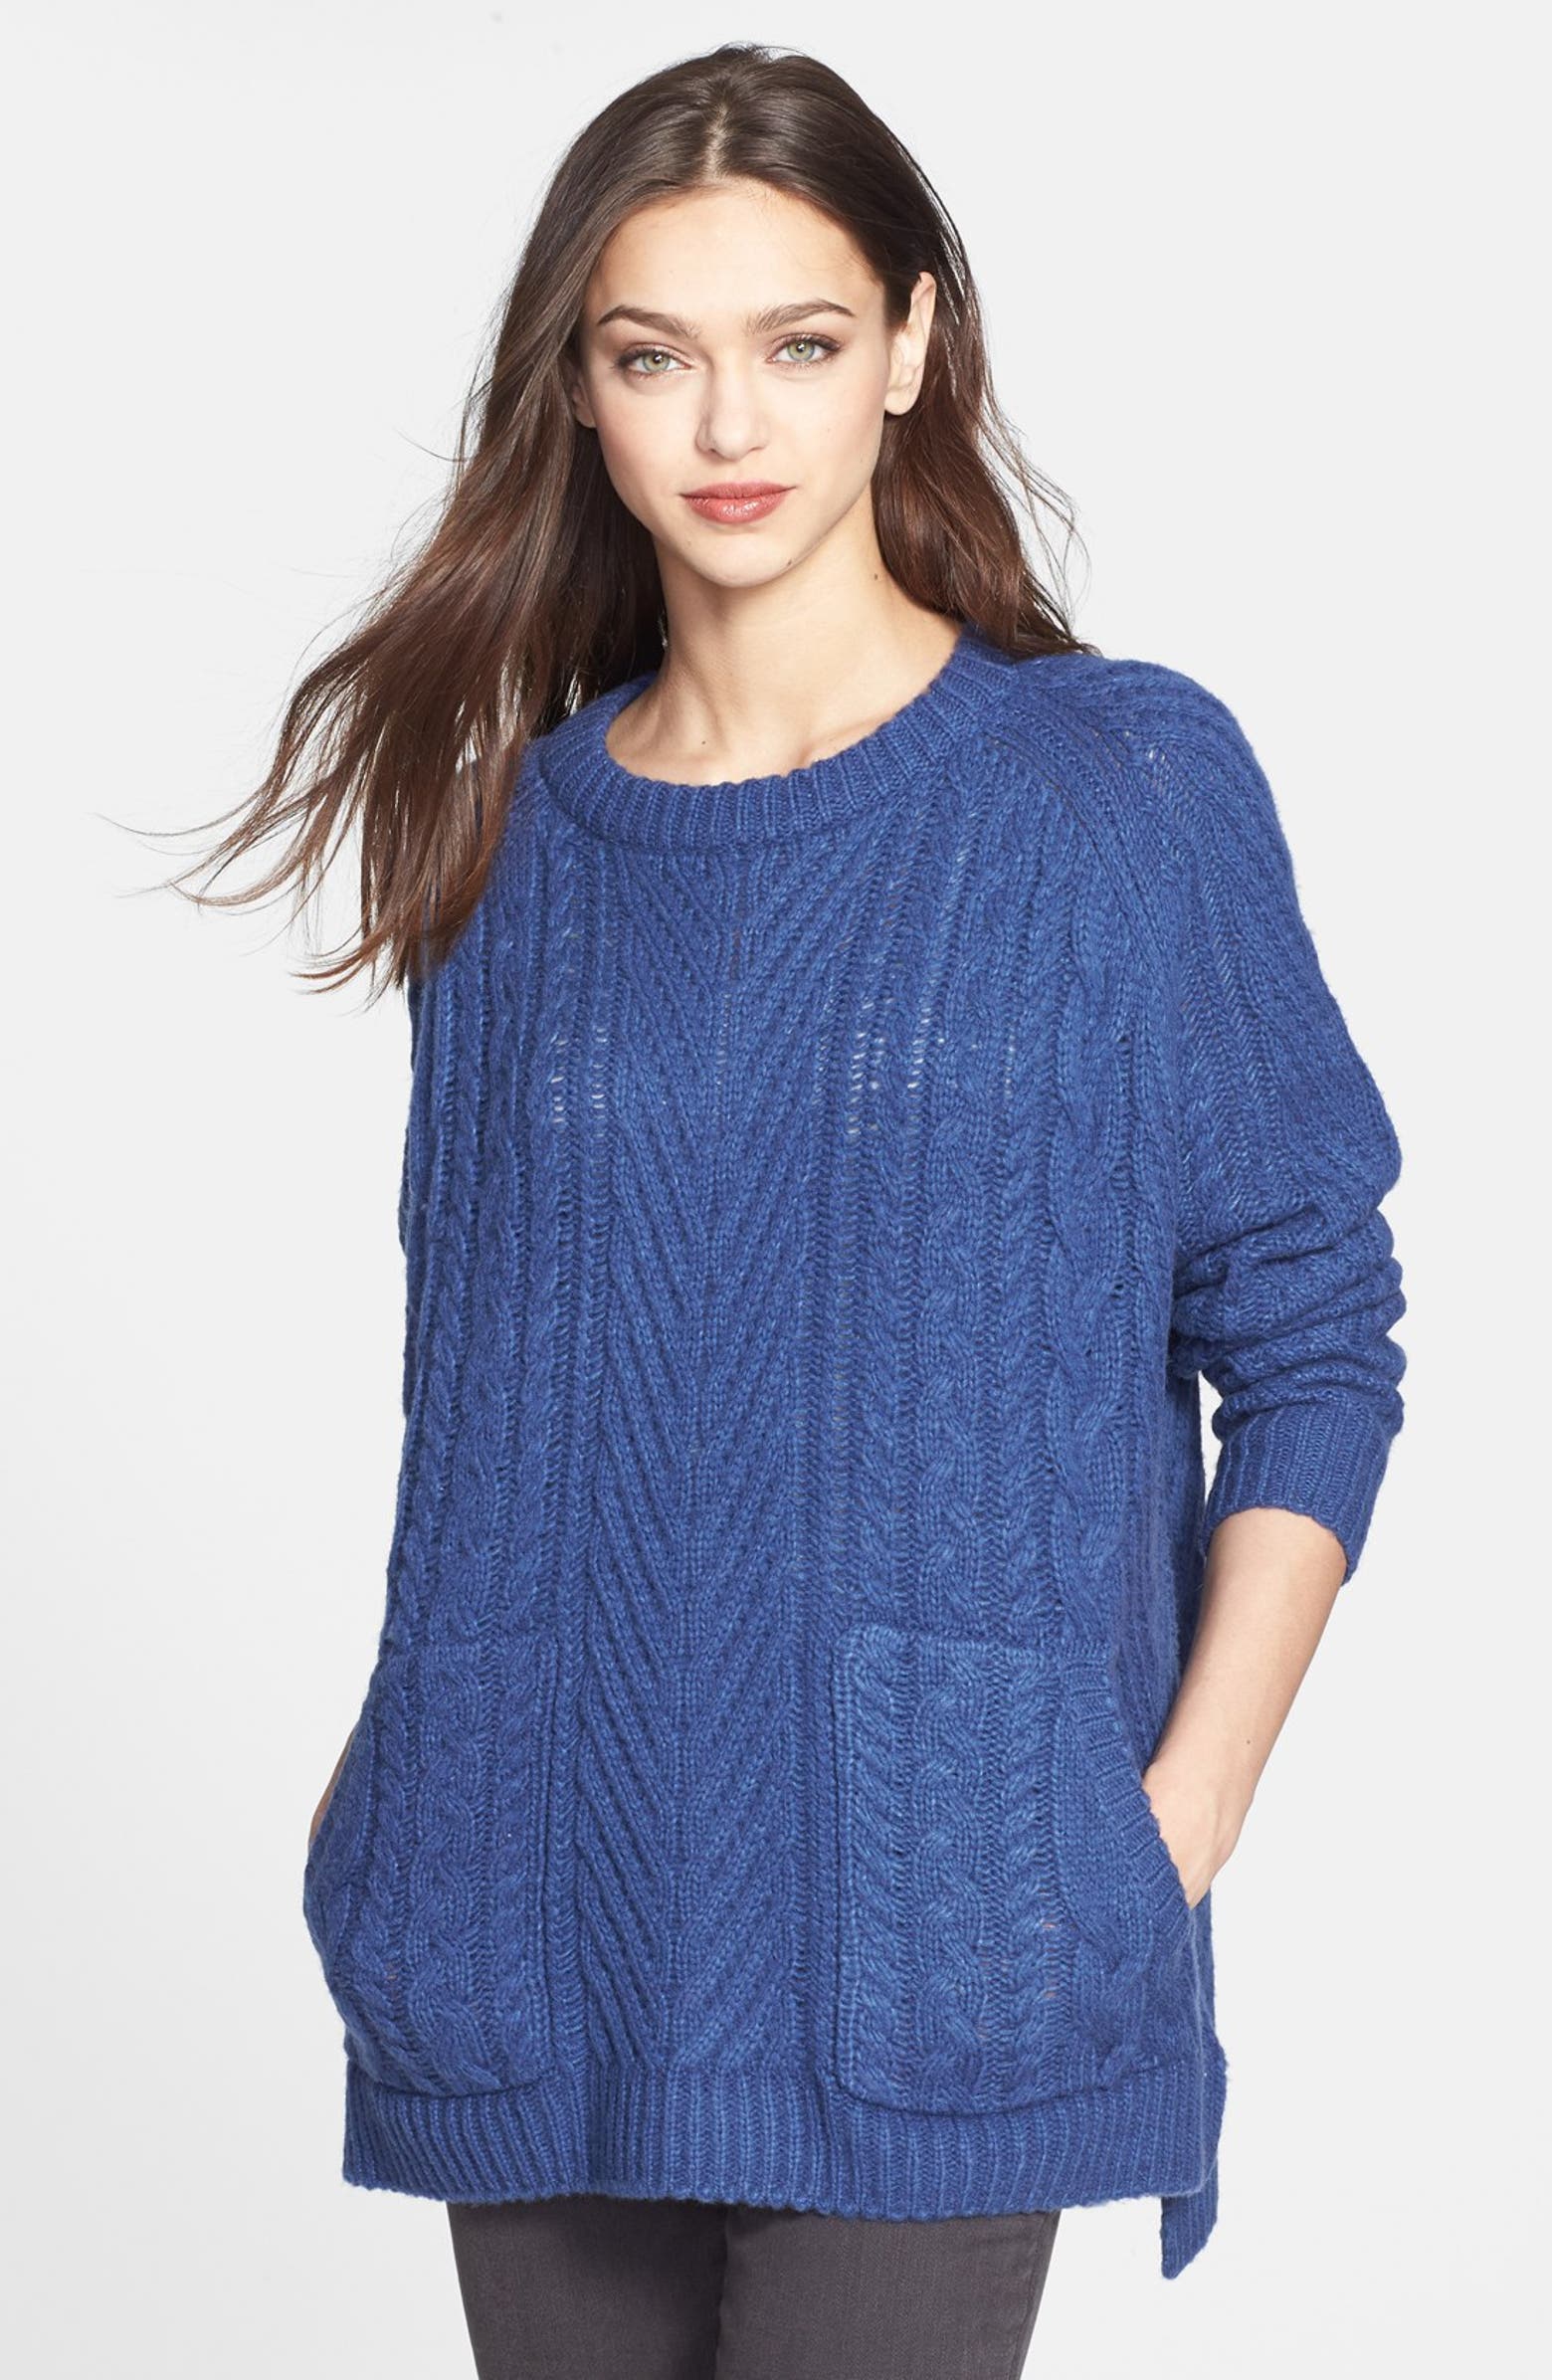 MARC BY MARC JACOBS 'James' Sweater | Nordstrom